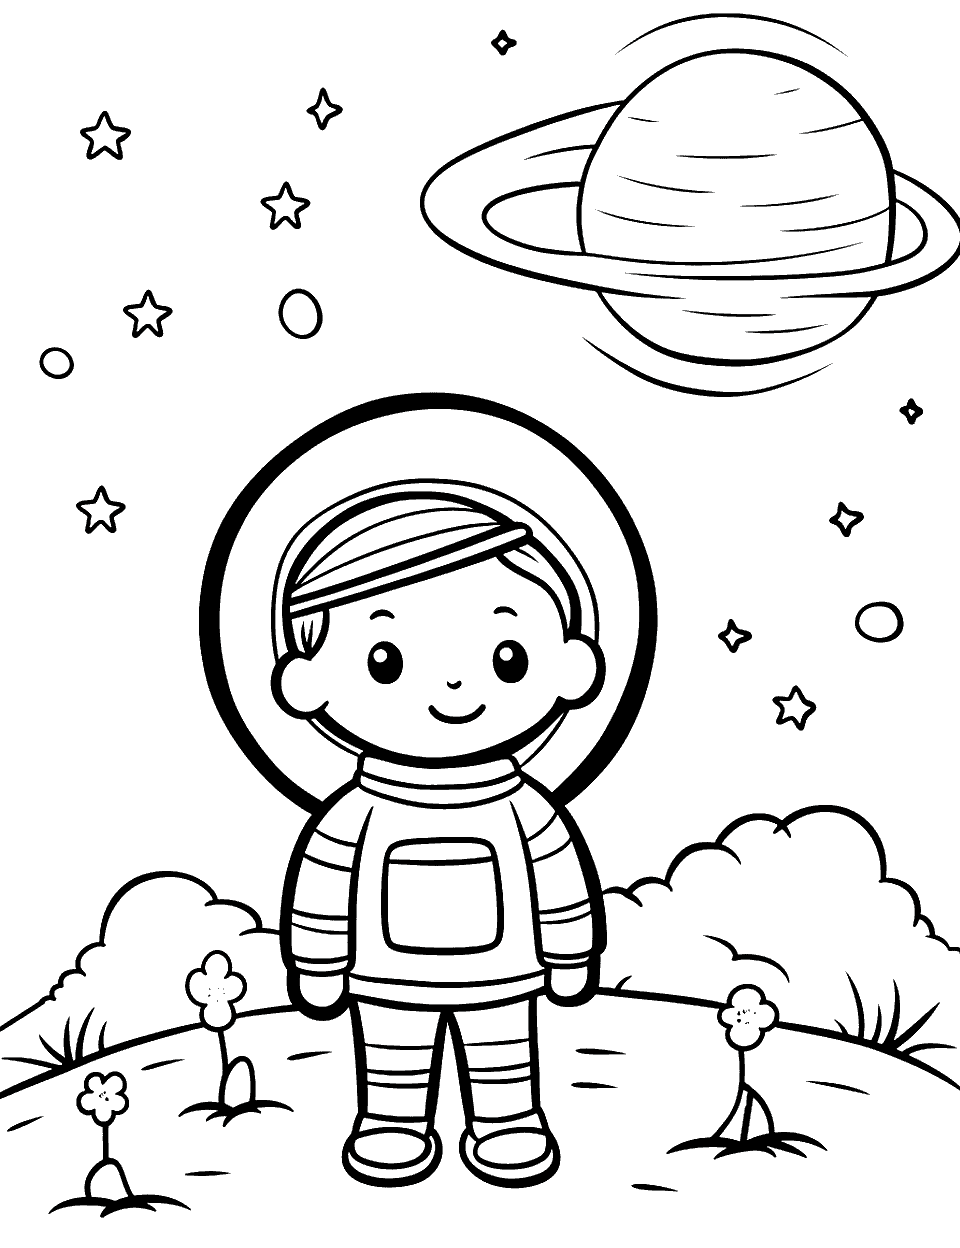 Space Exploration Coloring Page - An astronaut is standing on an alien planet with a simple, easy-to-color design.